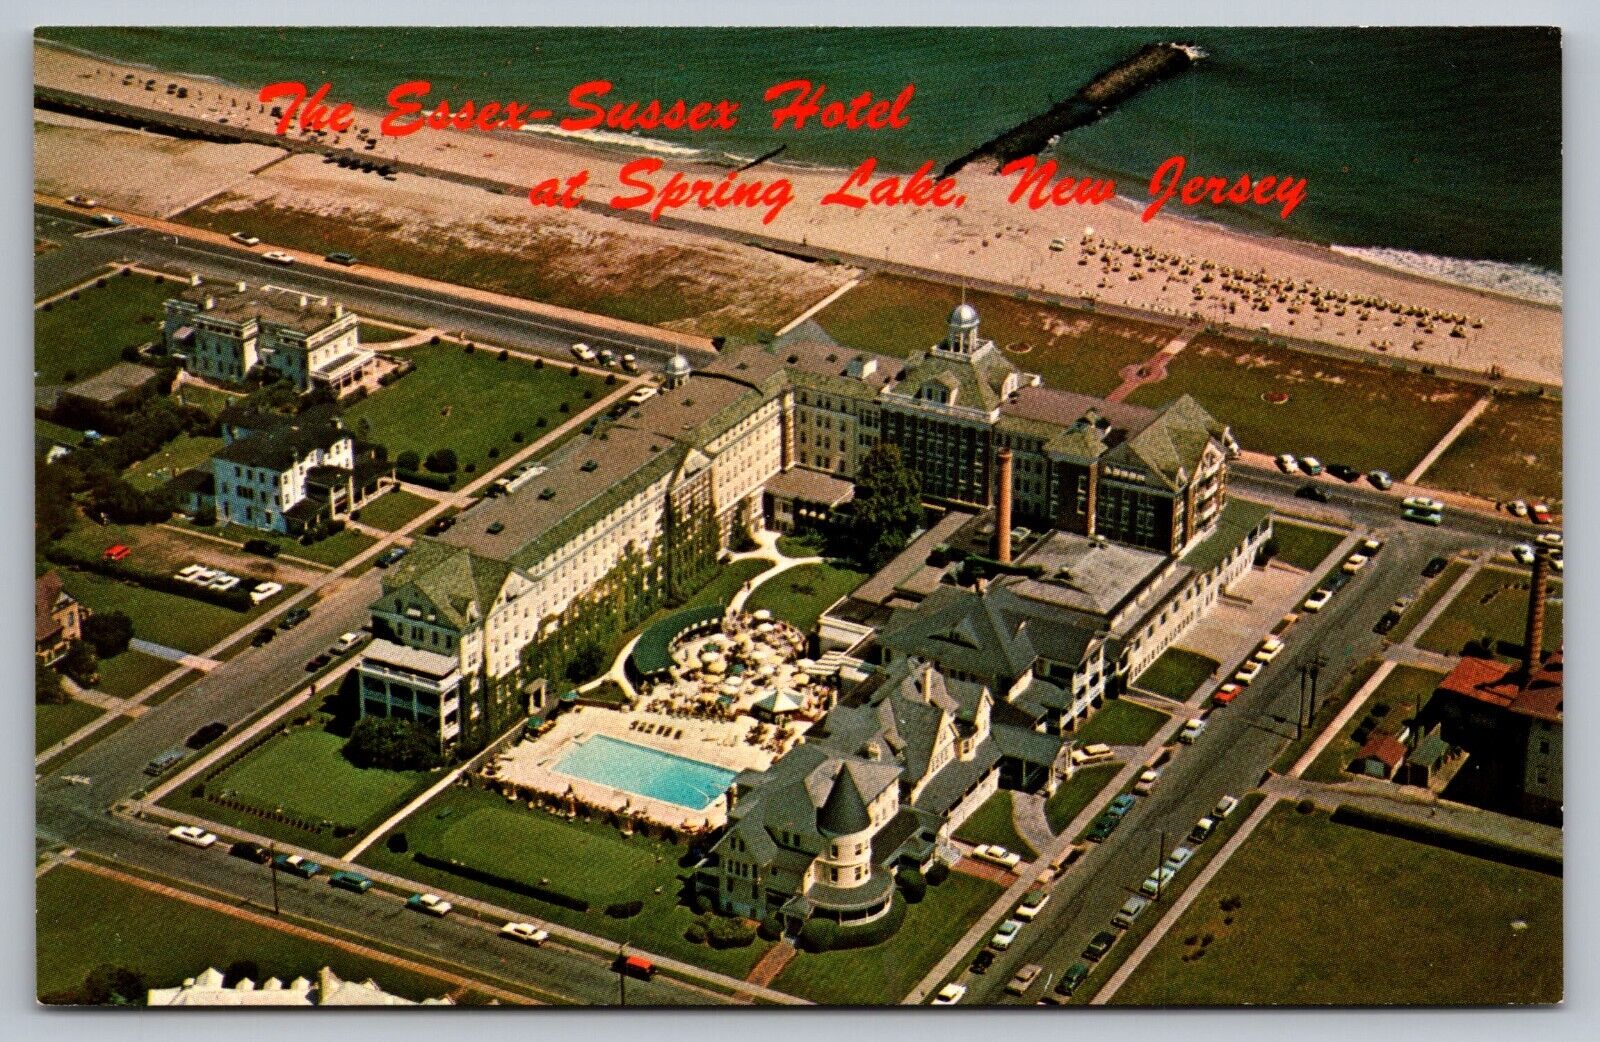 The Essex-Sussex Hotel Spring Lake New Jersey Vintage Postcard c1970–Really Nice